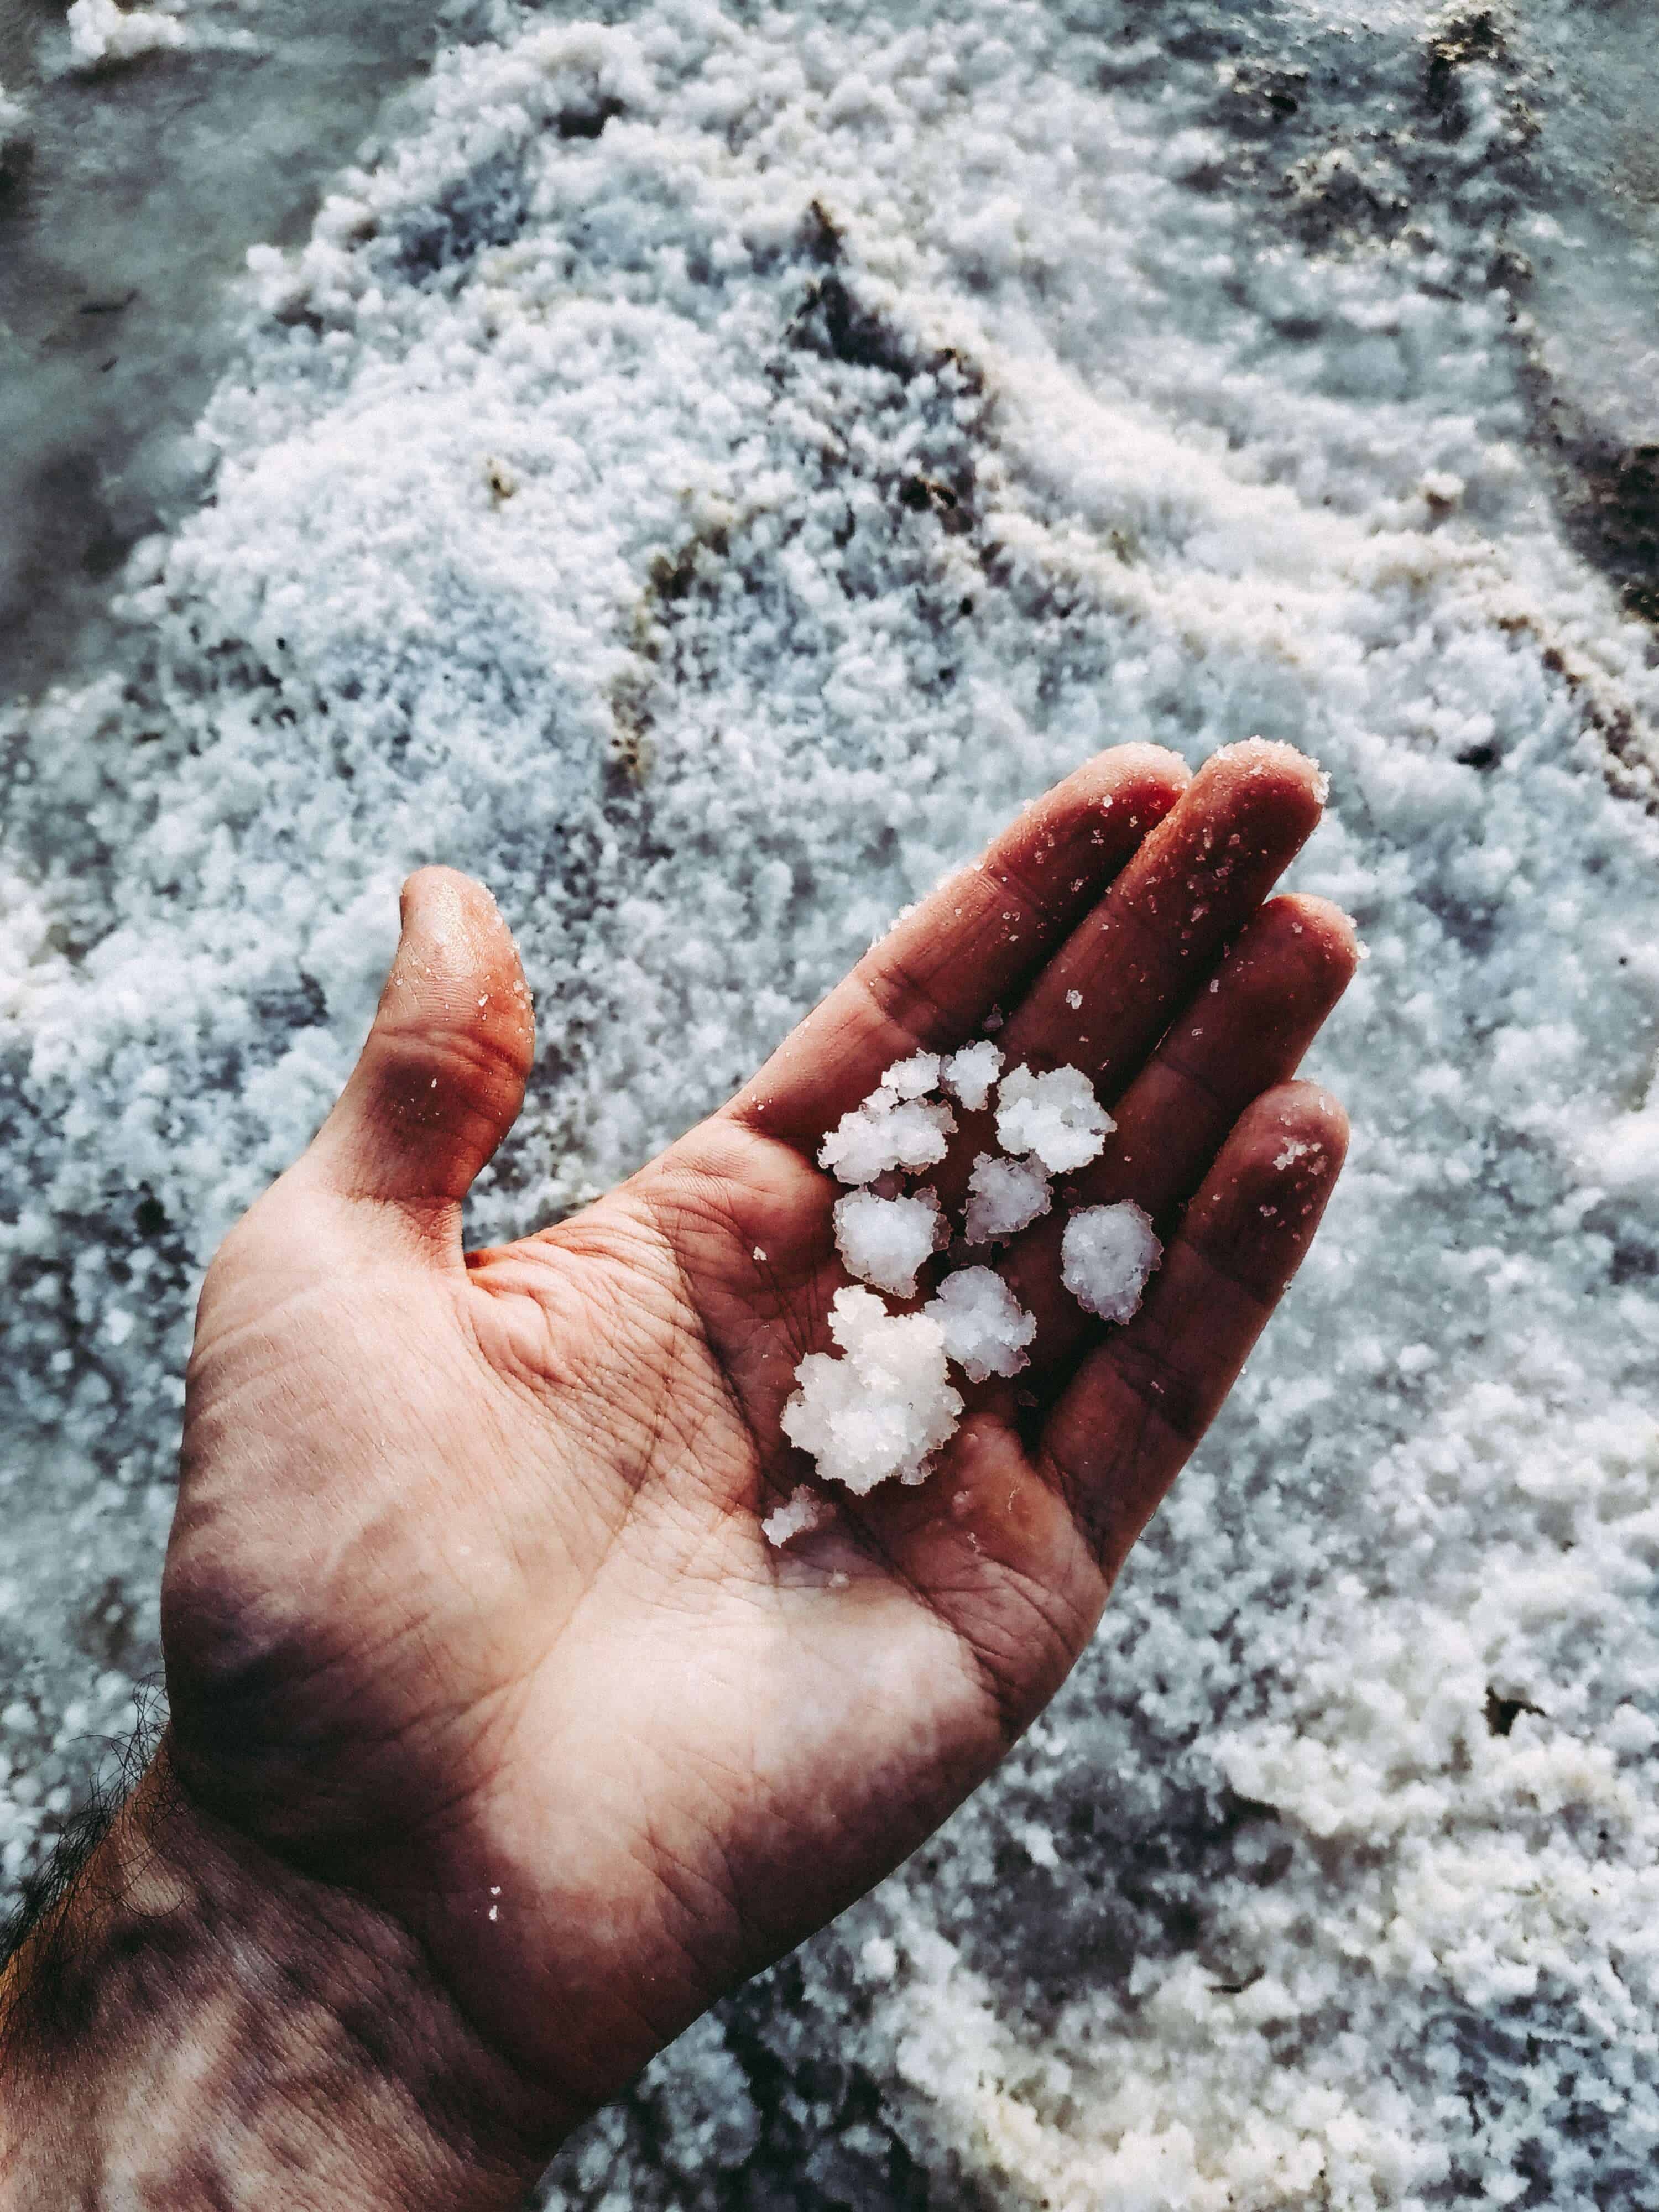 a individual with chlorinated rock salt in their hands above a pile of salt